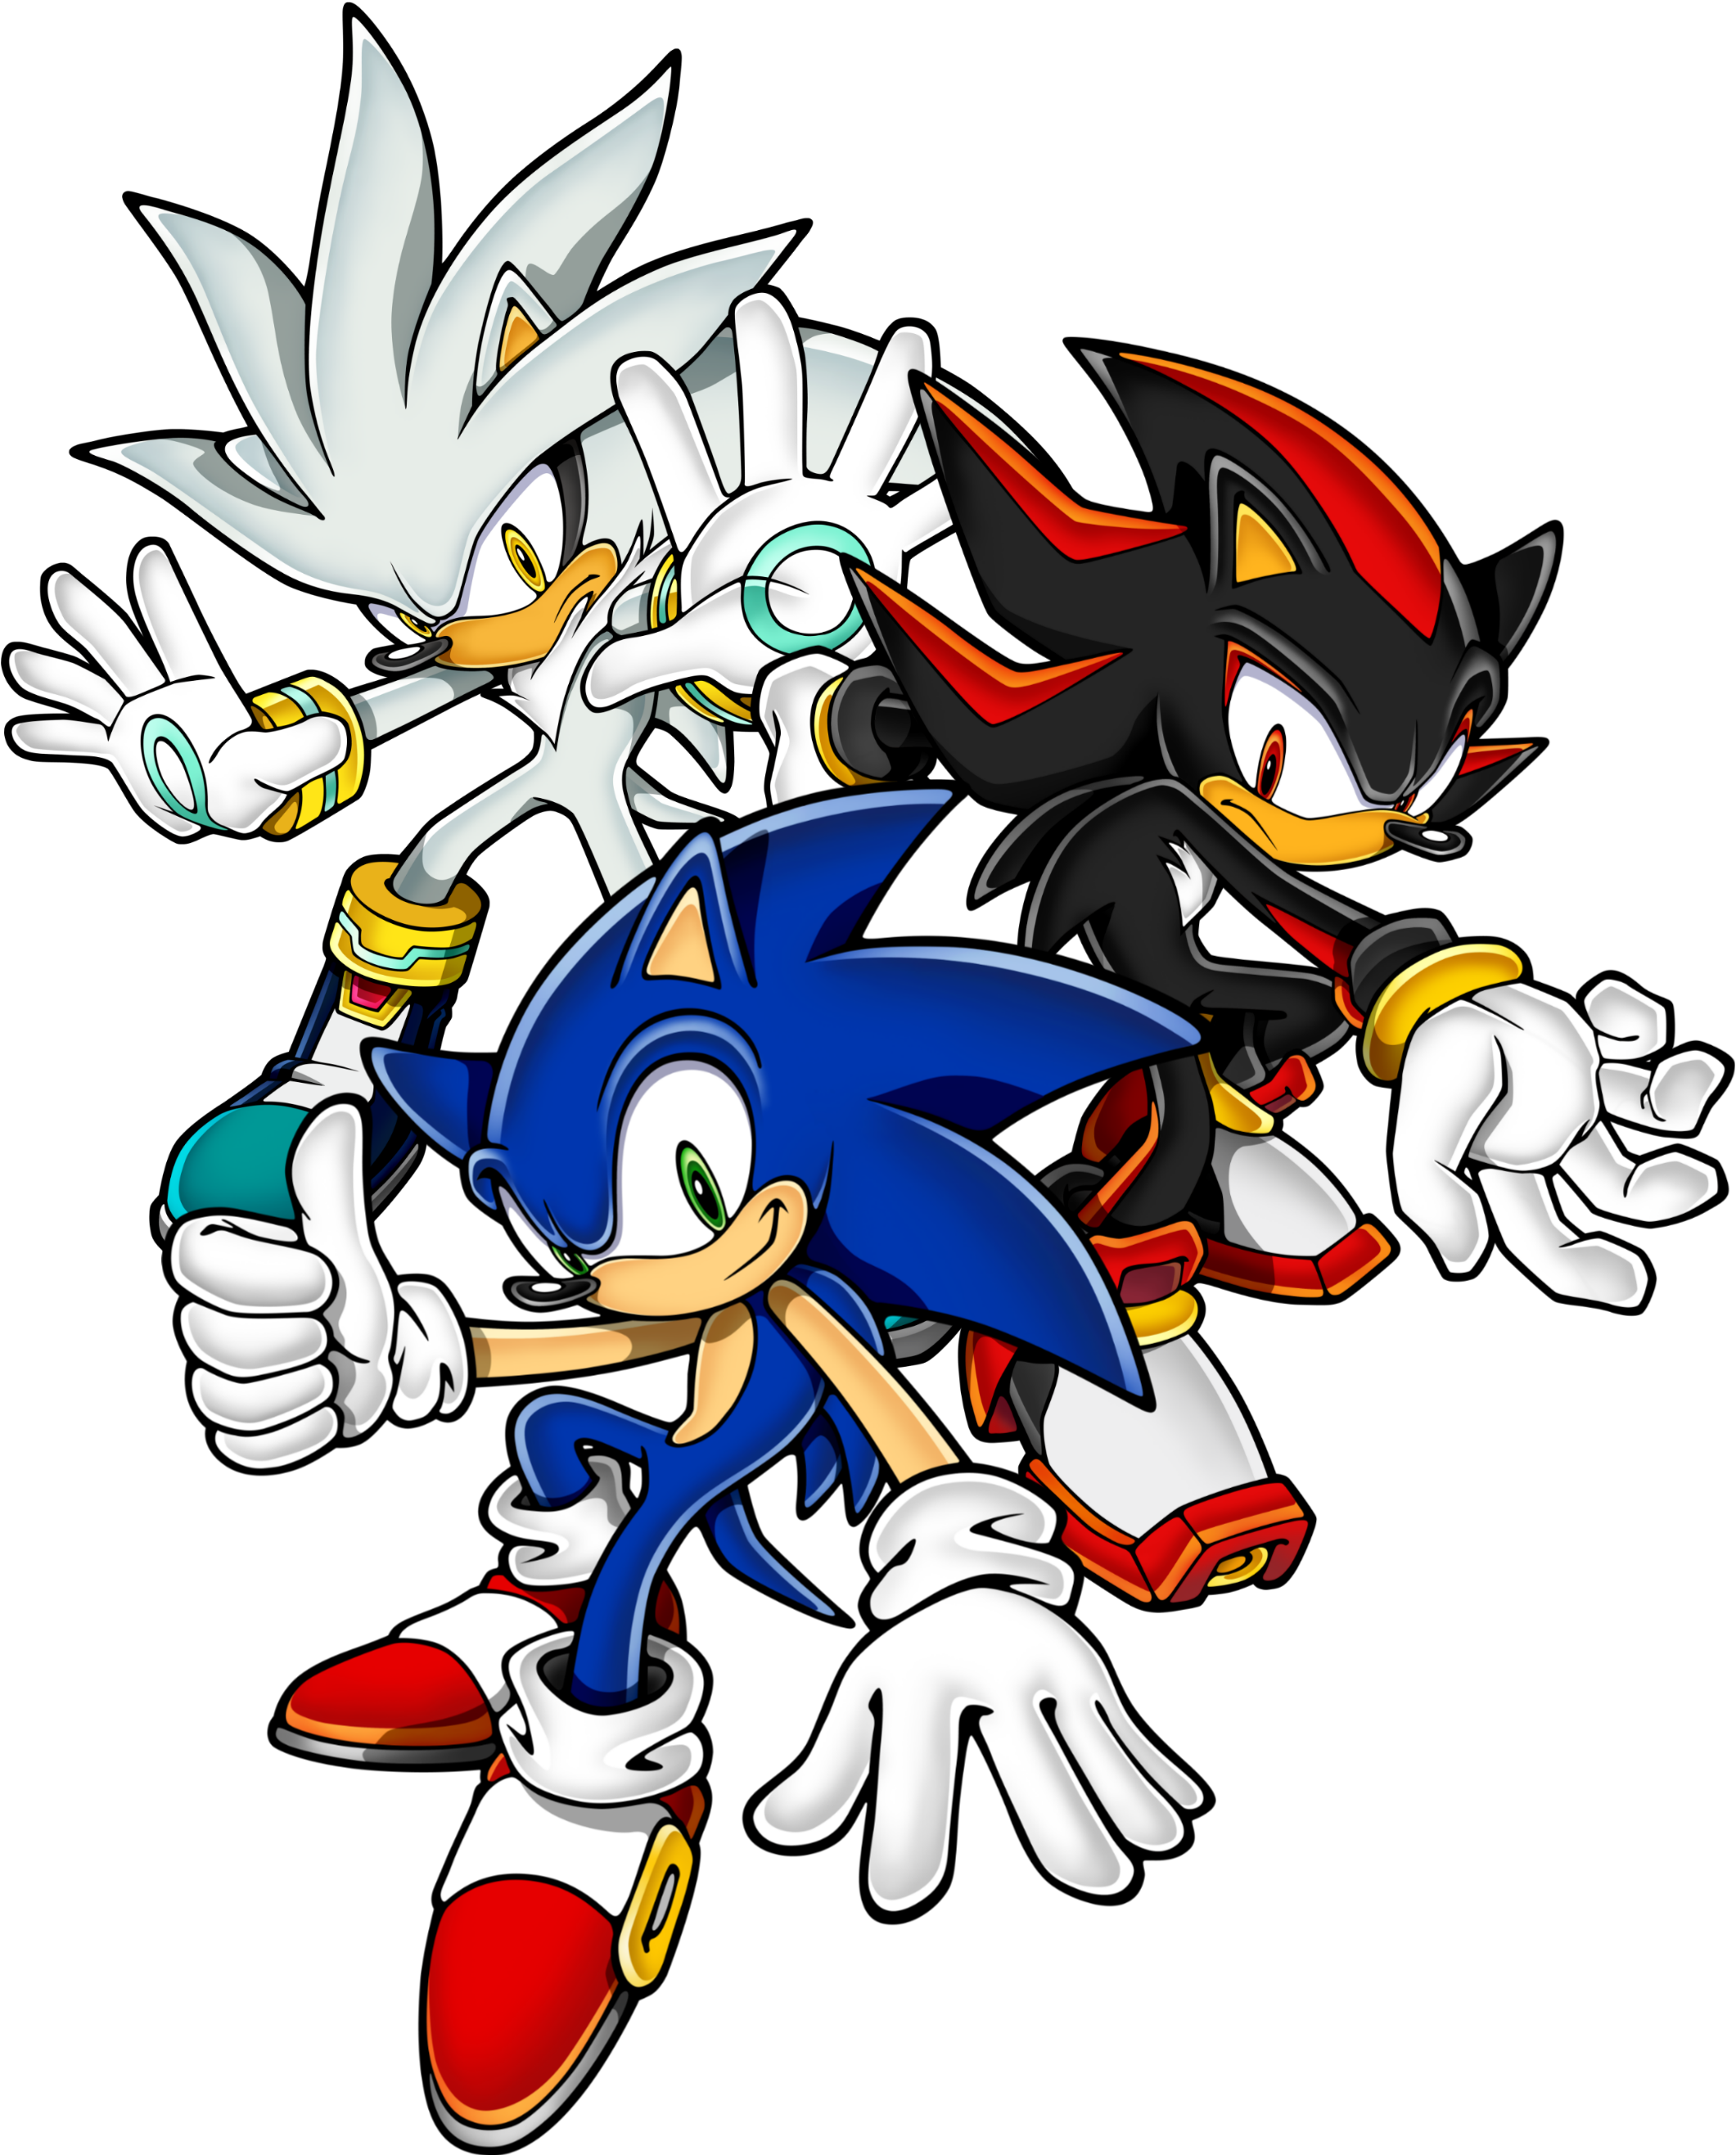 Sonic, Silver, and Shadow